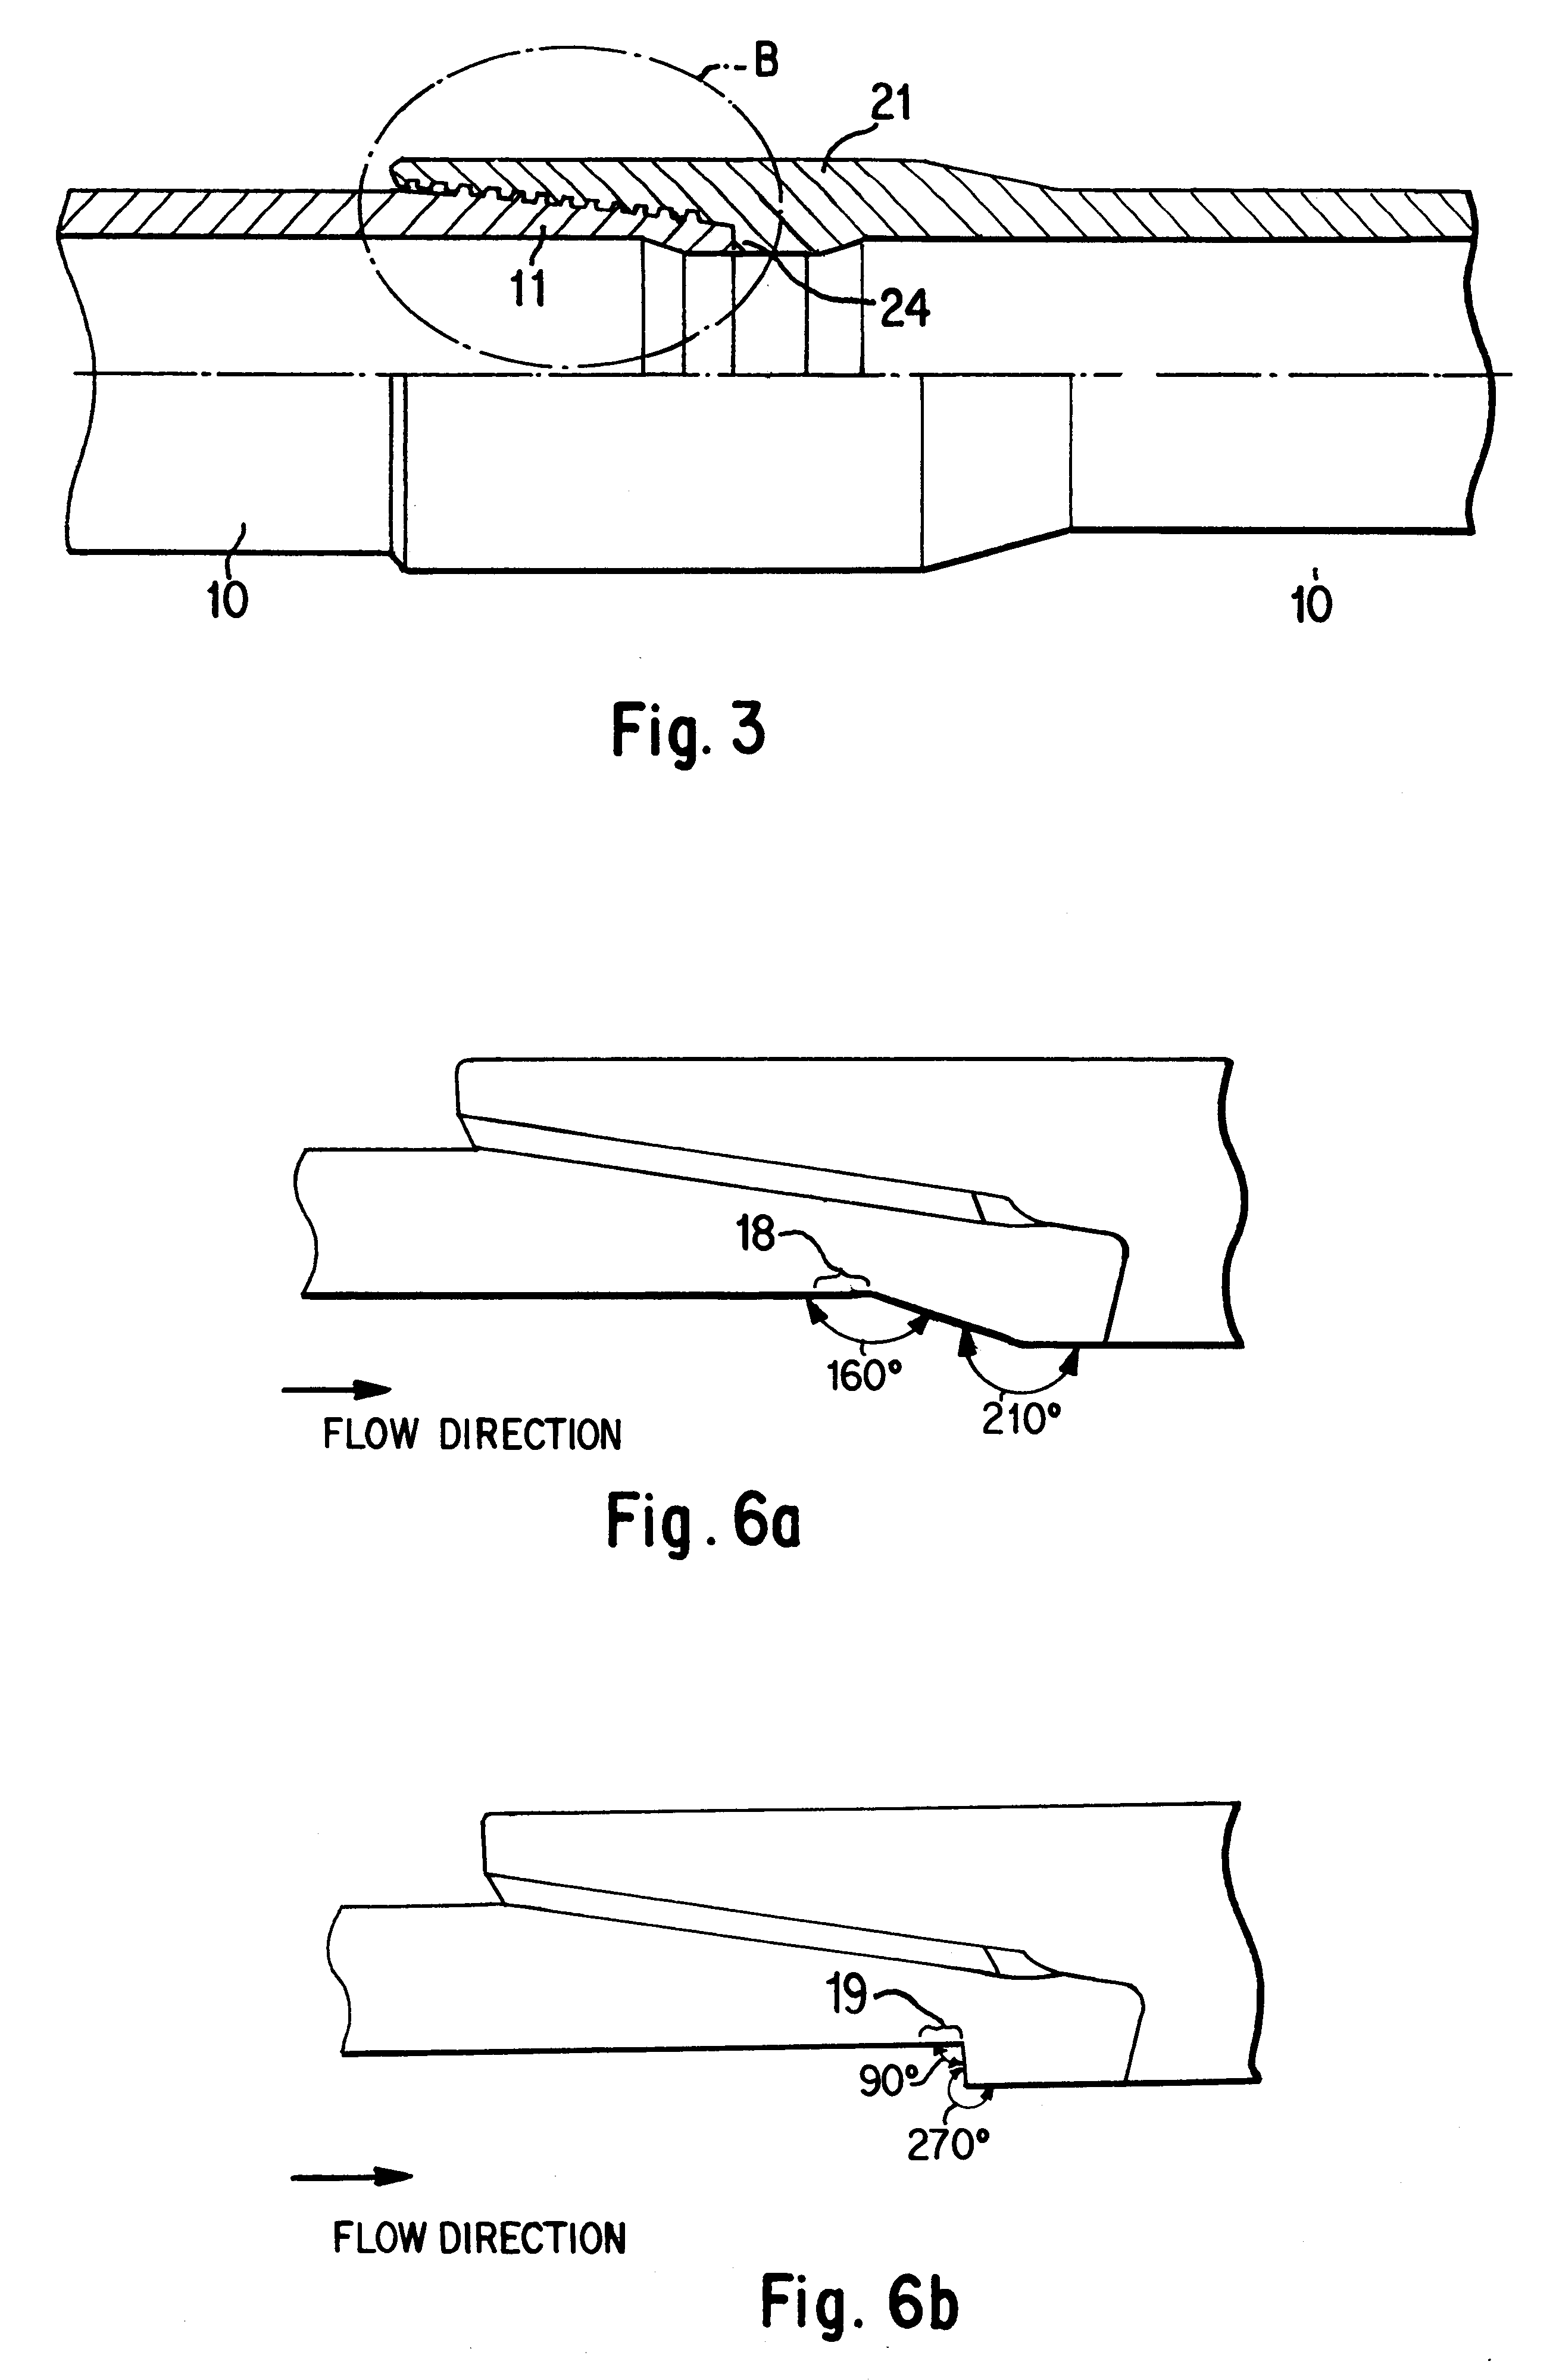 Threaded connection for oil country tubular goods and its method of manufacturing